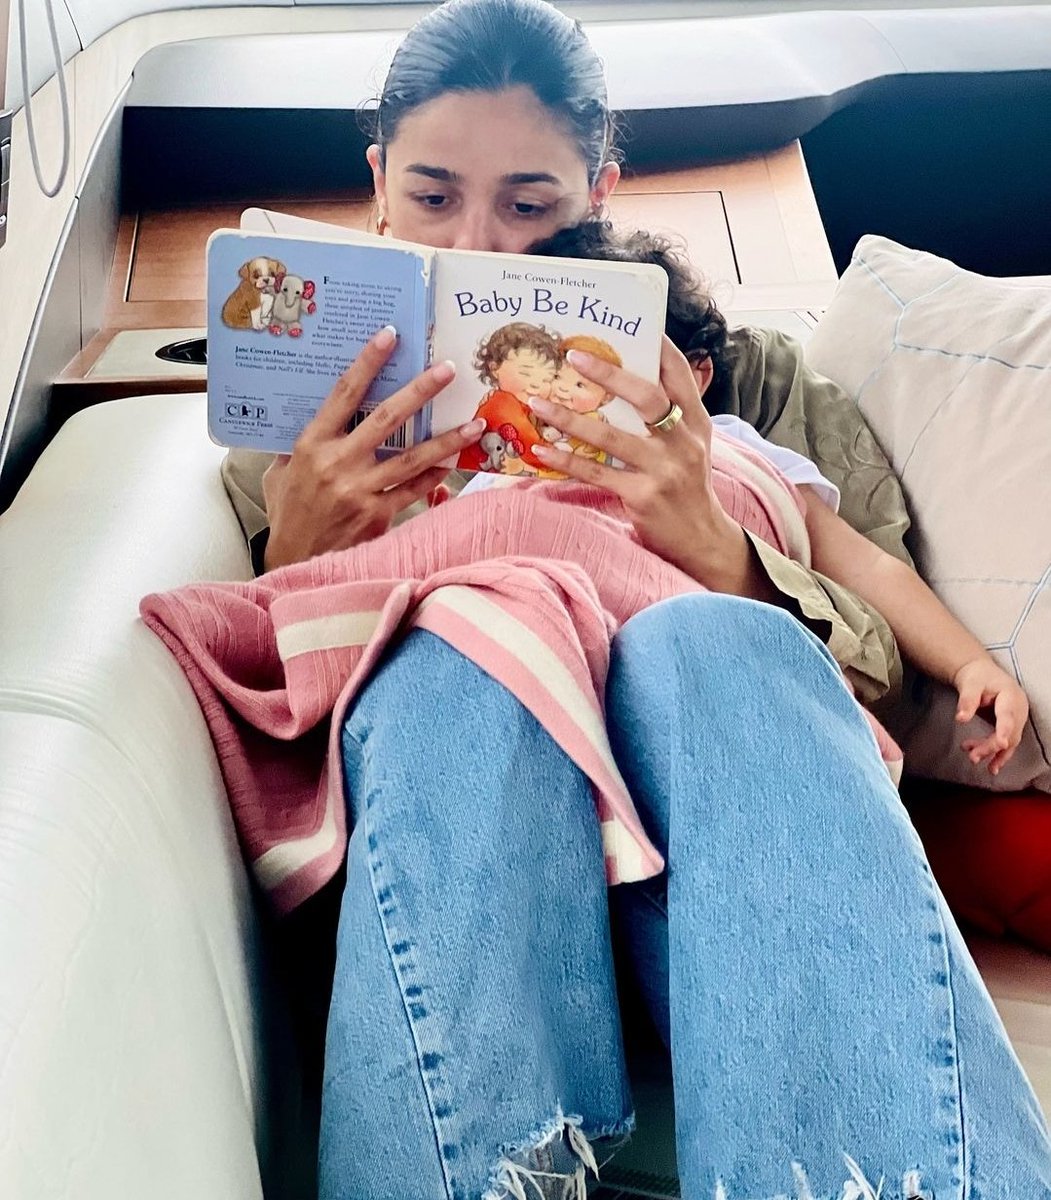 Sunday reading sesh!📖💕 #AliaBhatt shares a pic with her daughter #Raha.